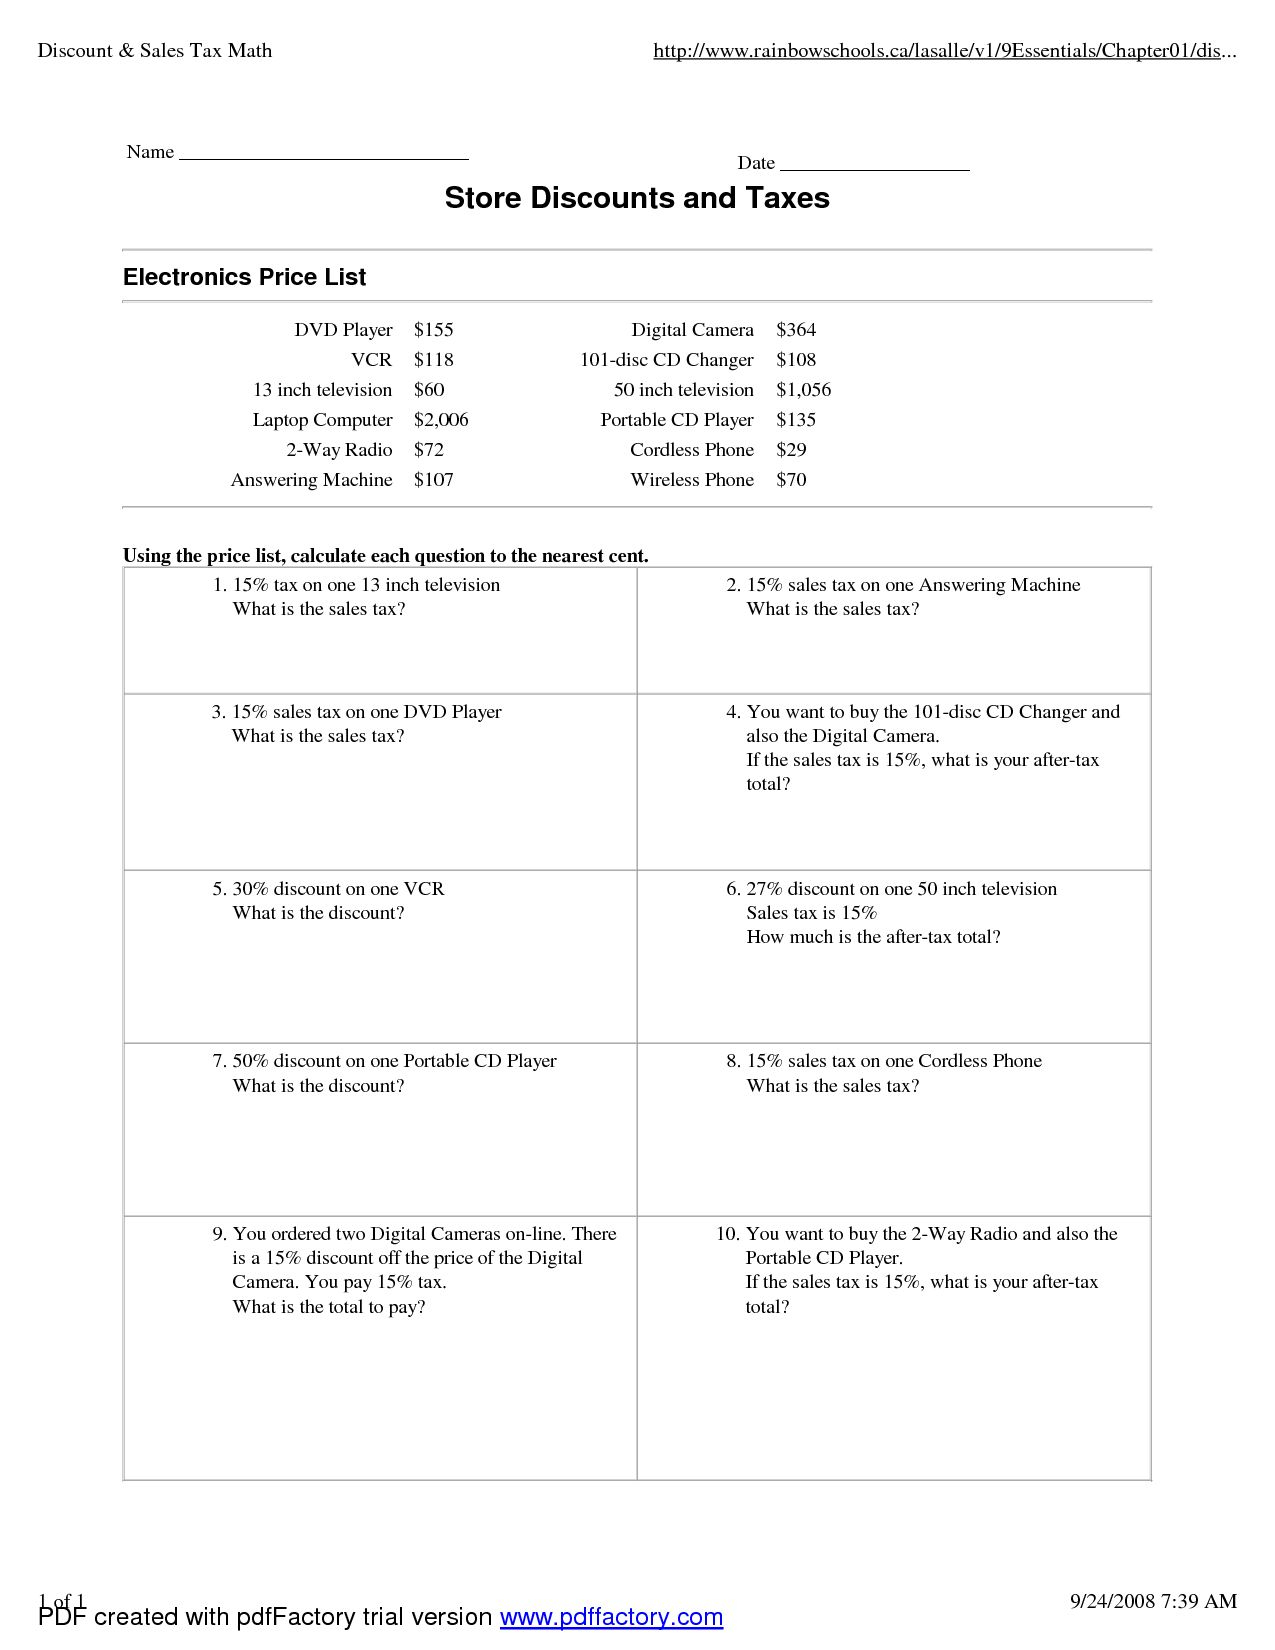 markups-and-markdowns-word-problems-matching-worksheet-answers-db